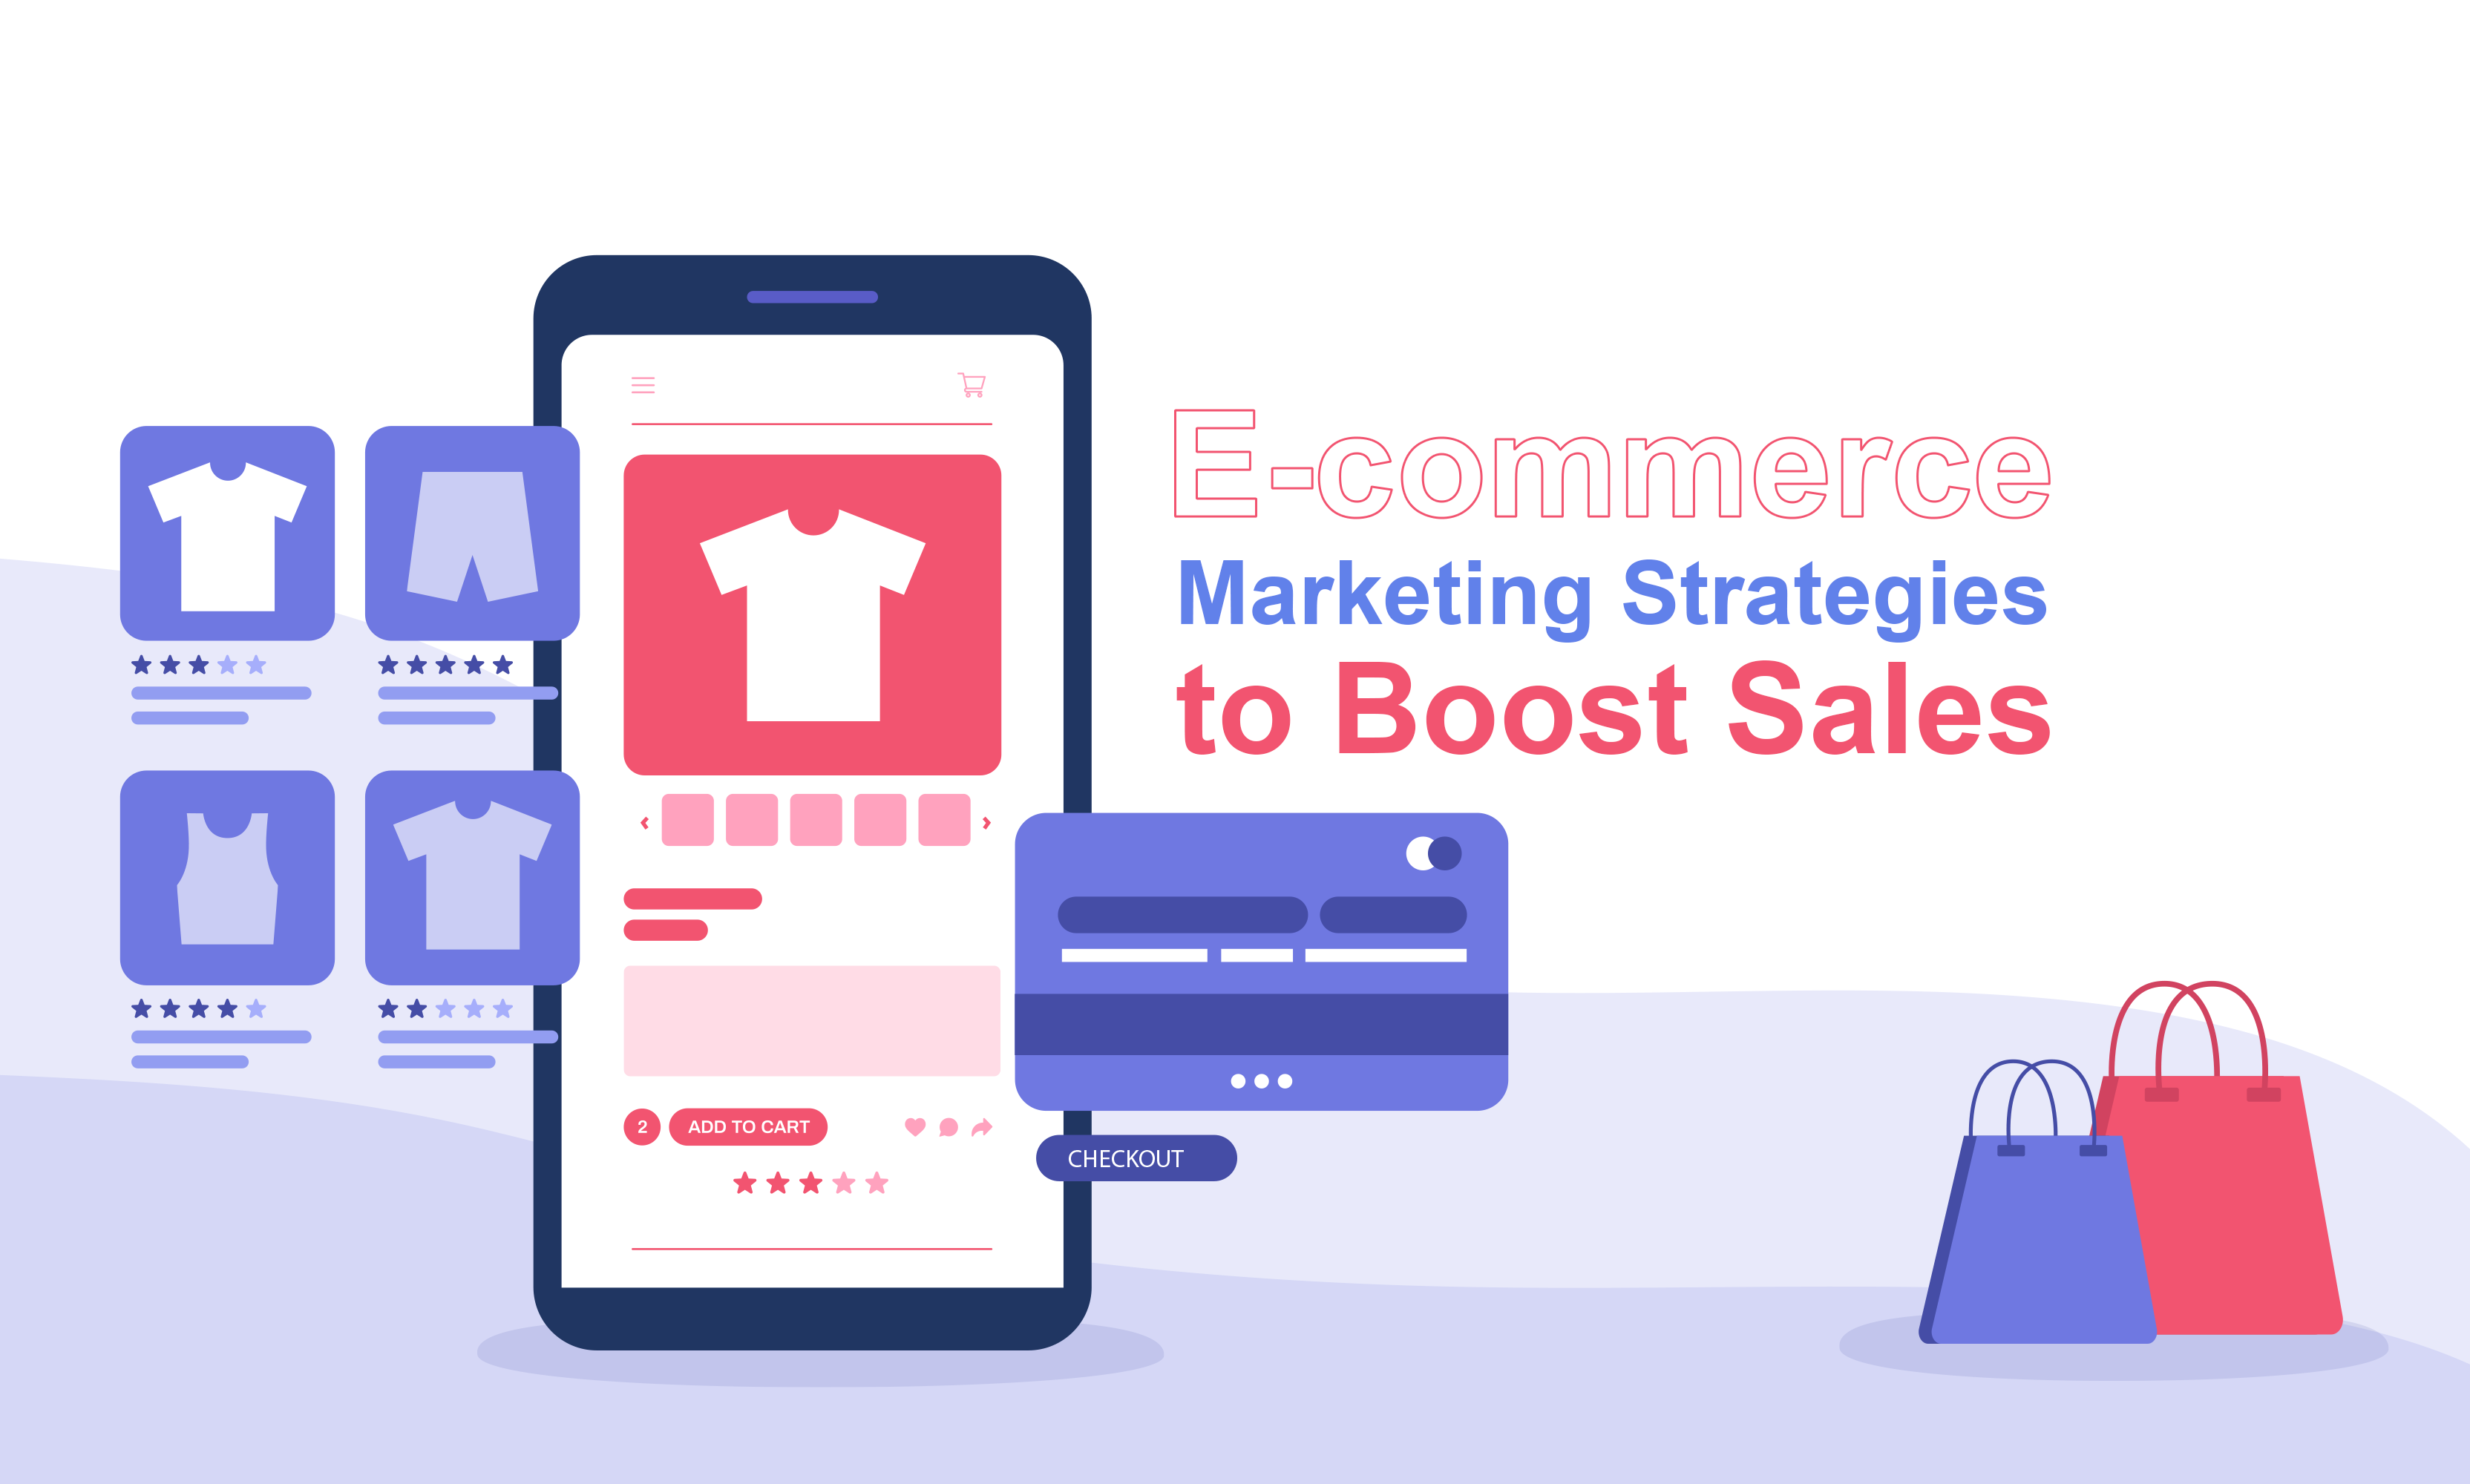 E-commerce Marketing Strategies to Boost Sales